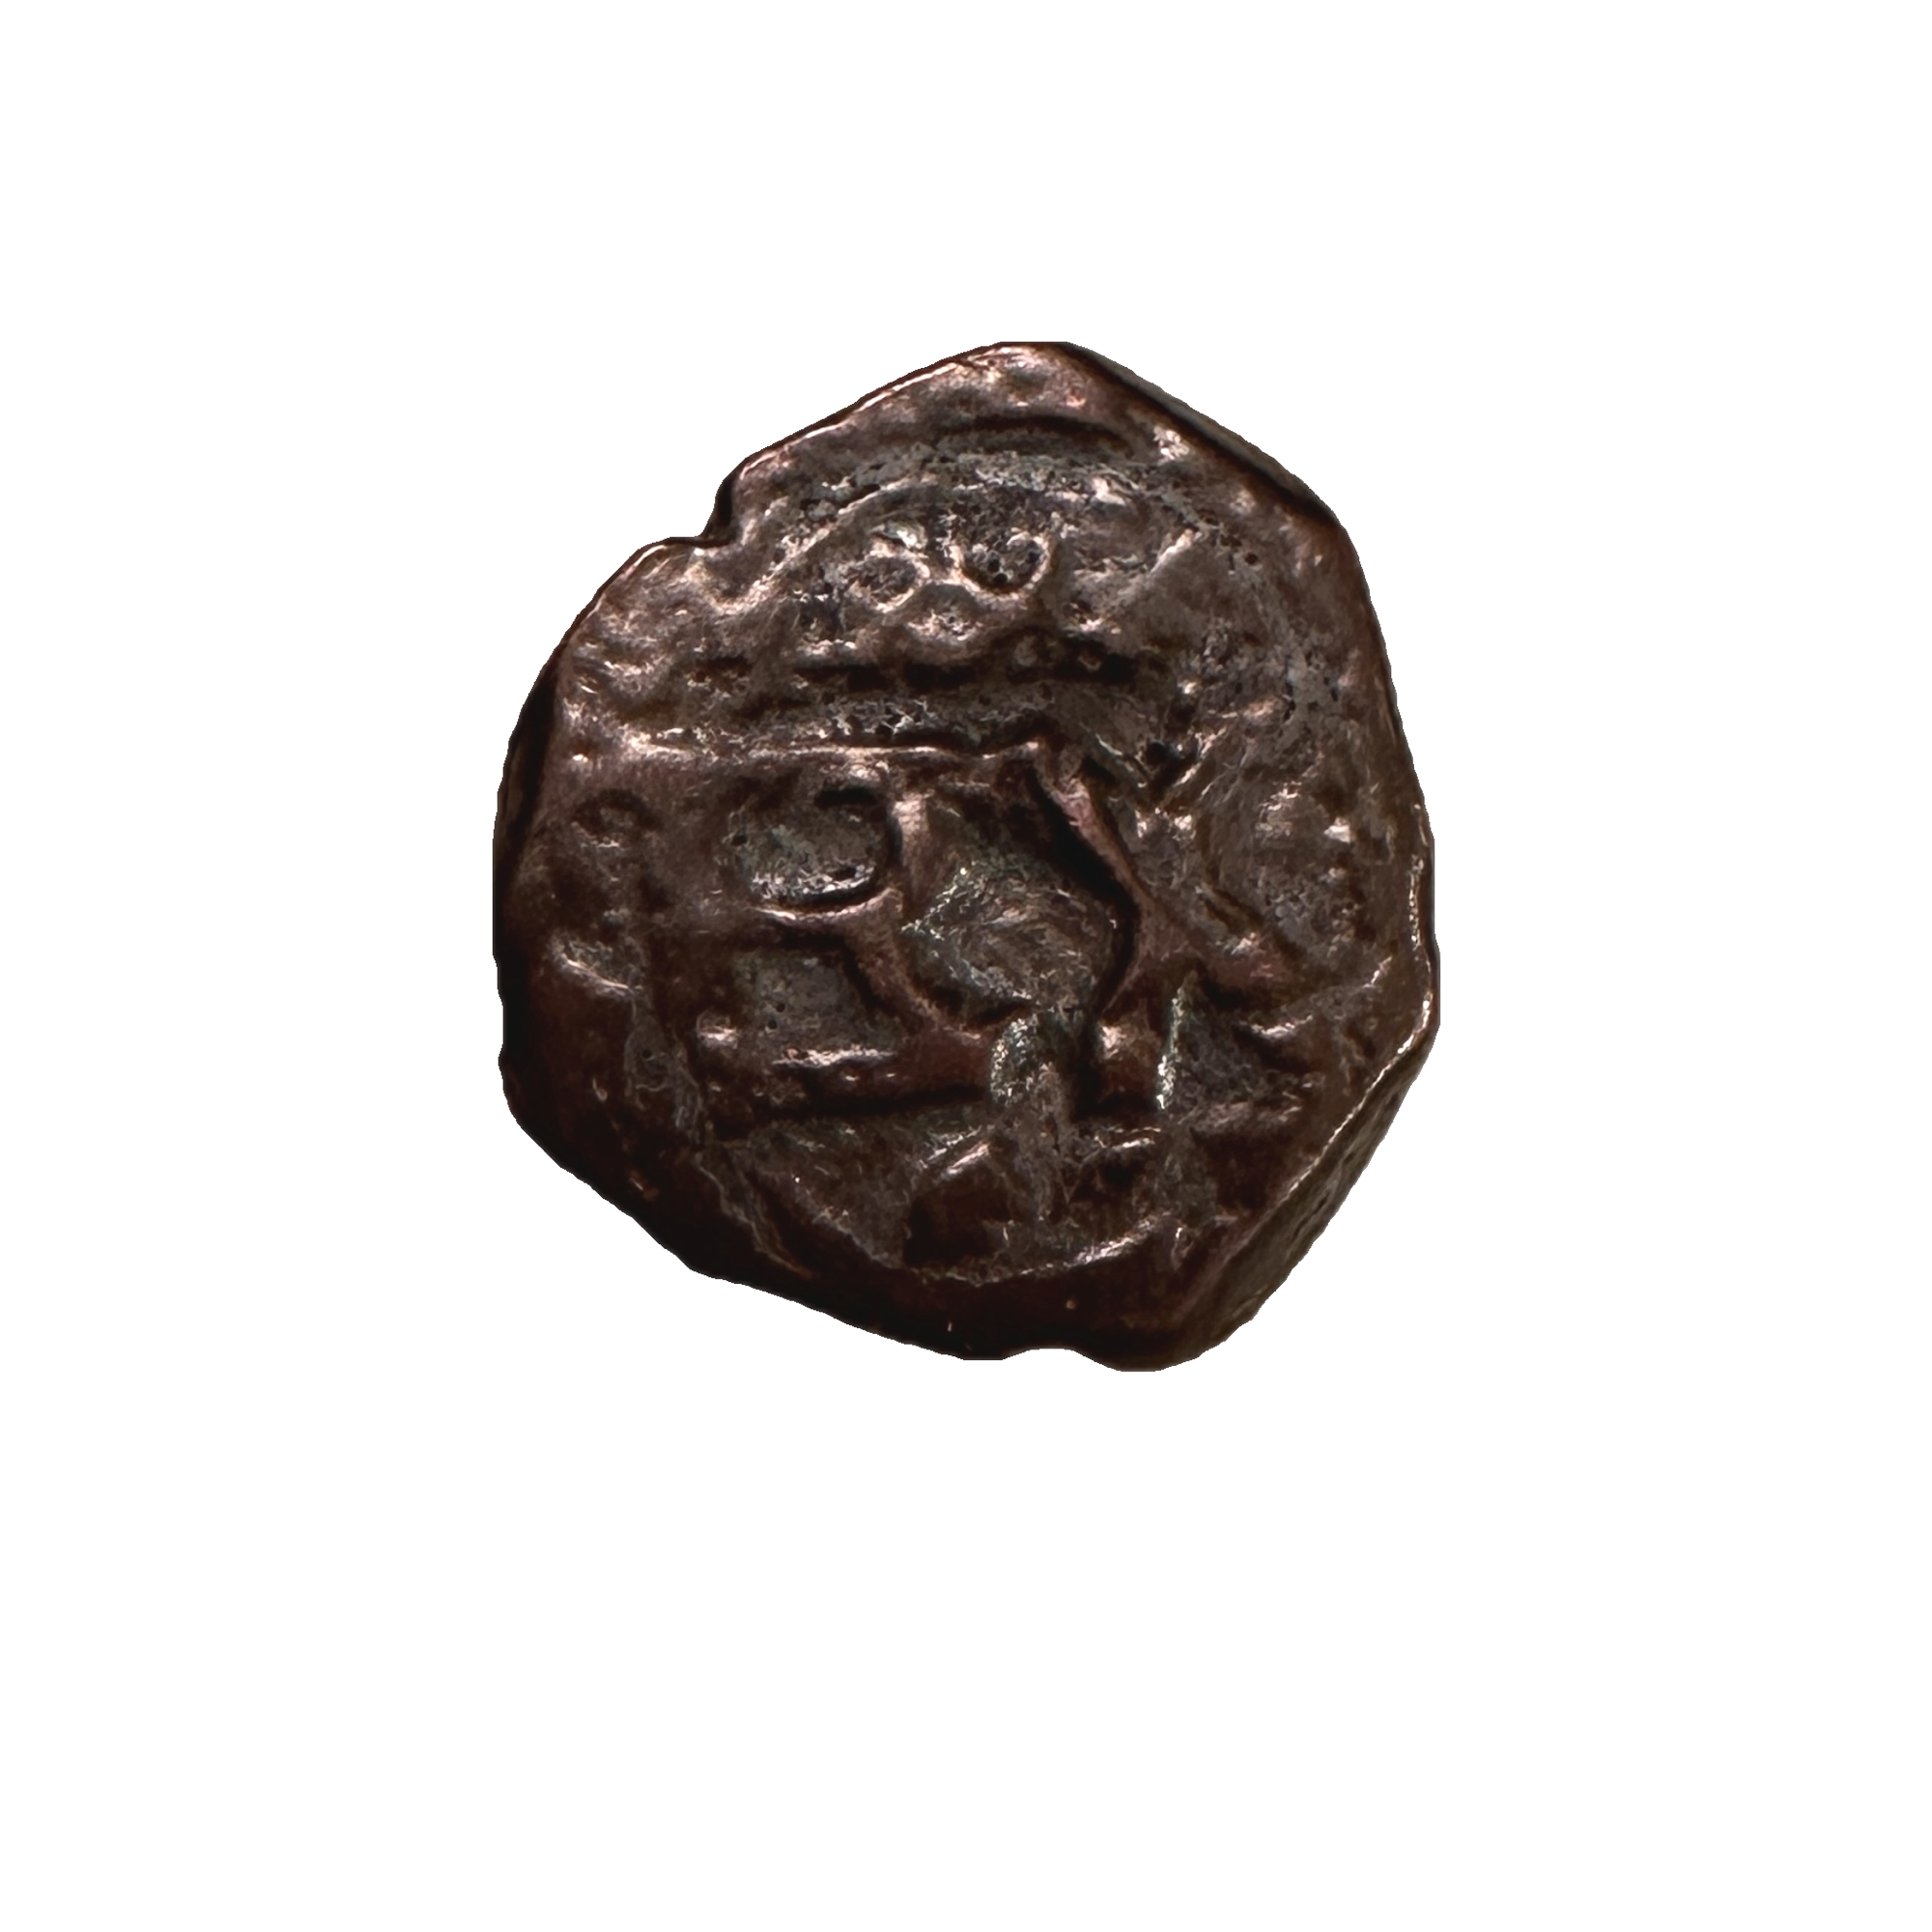 The patina on the 1600s era pirate coin makes the details really stand out. The coin was hand hammered.